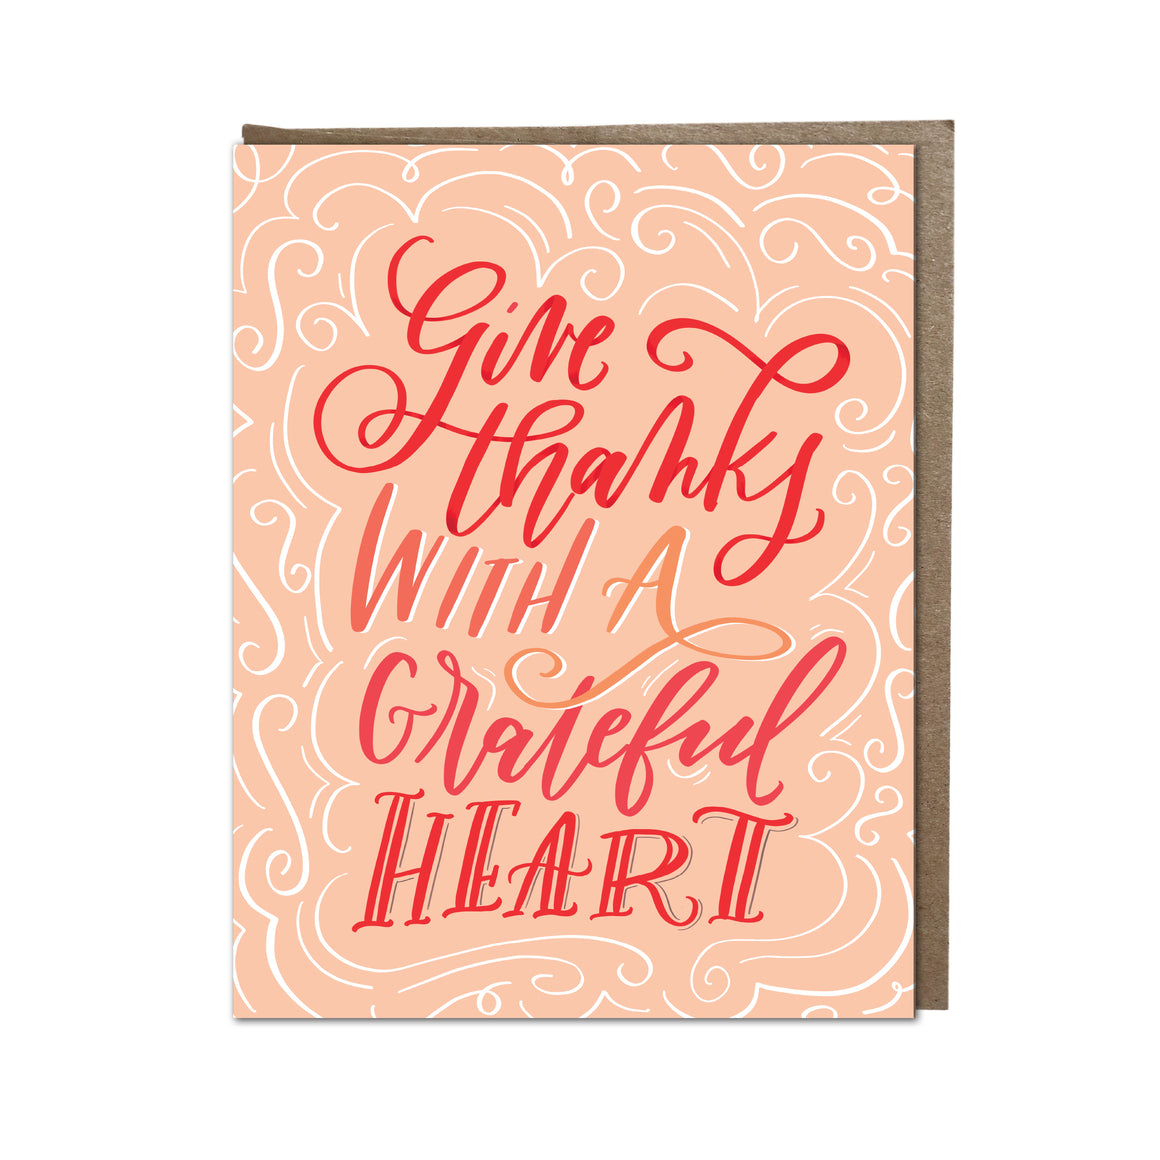 "Give Thanks With A Grateful Heart" card